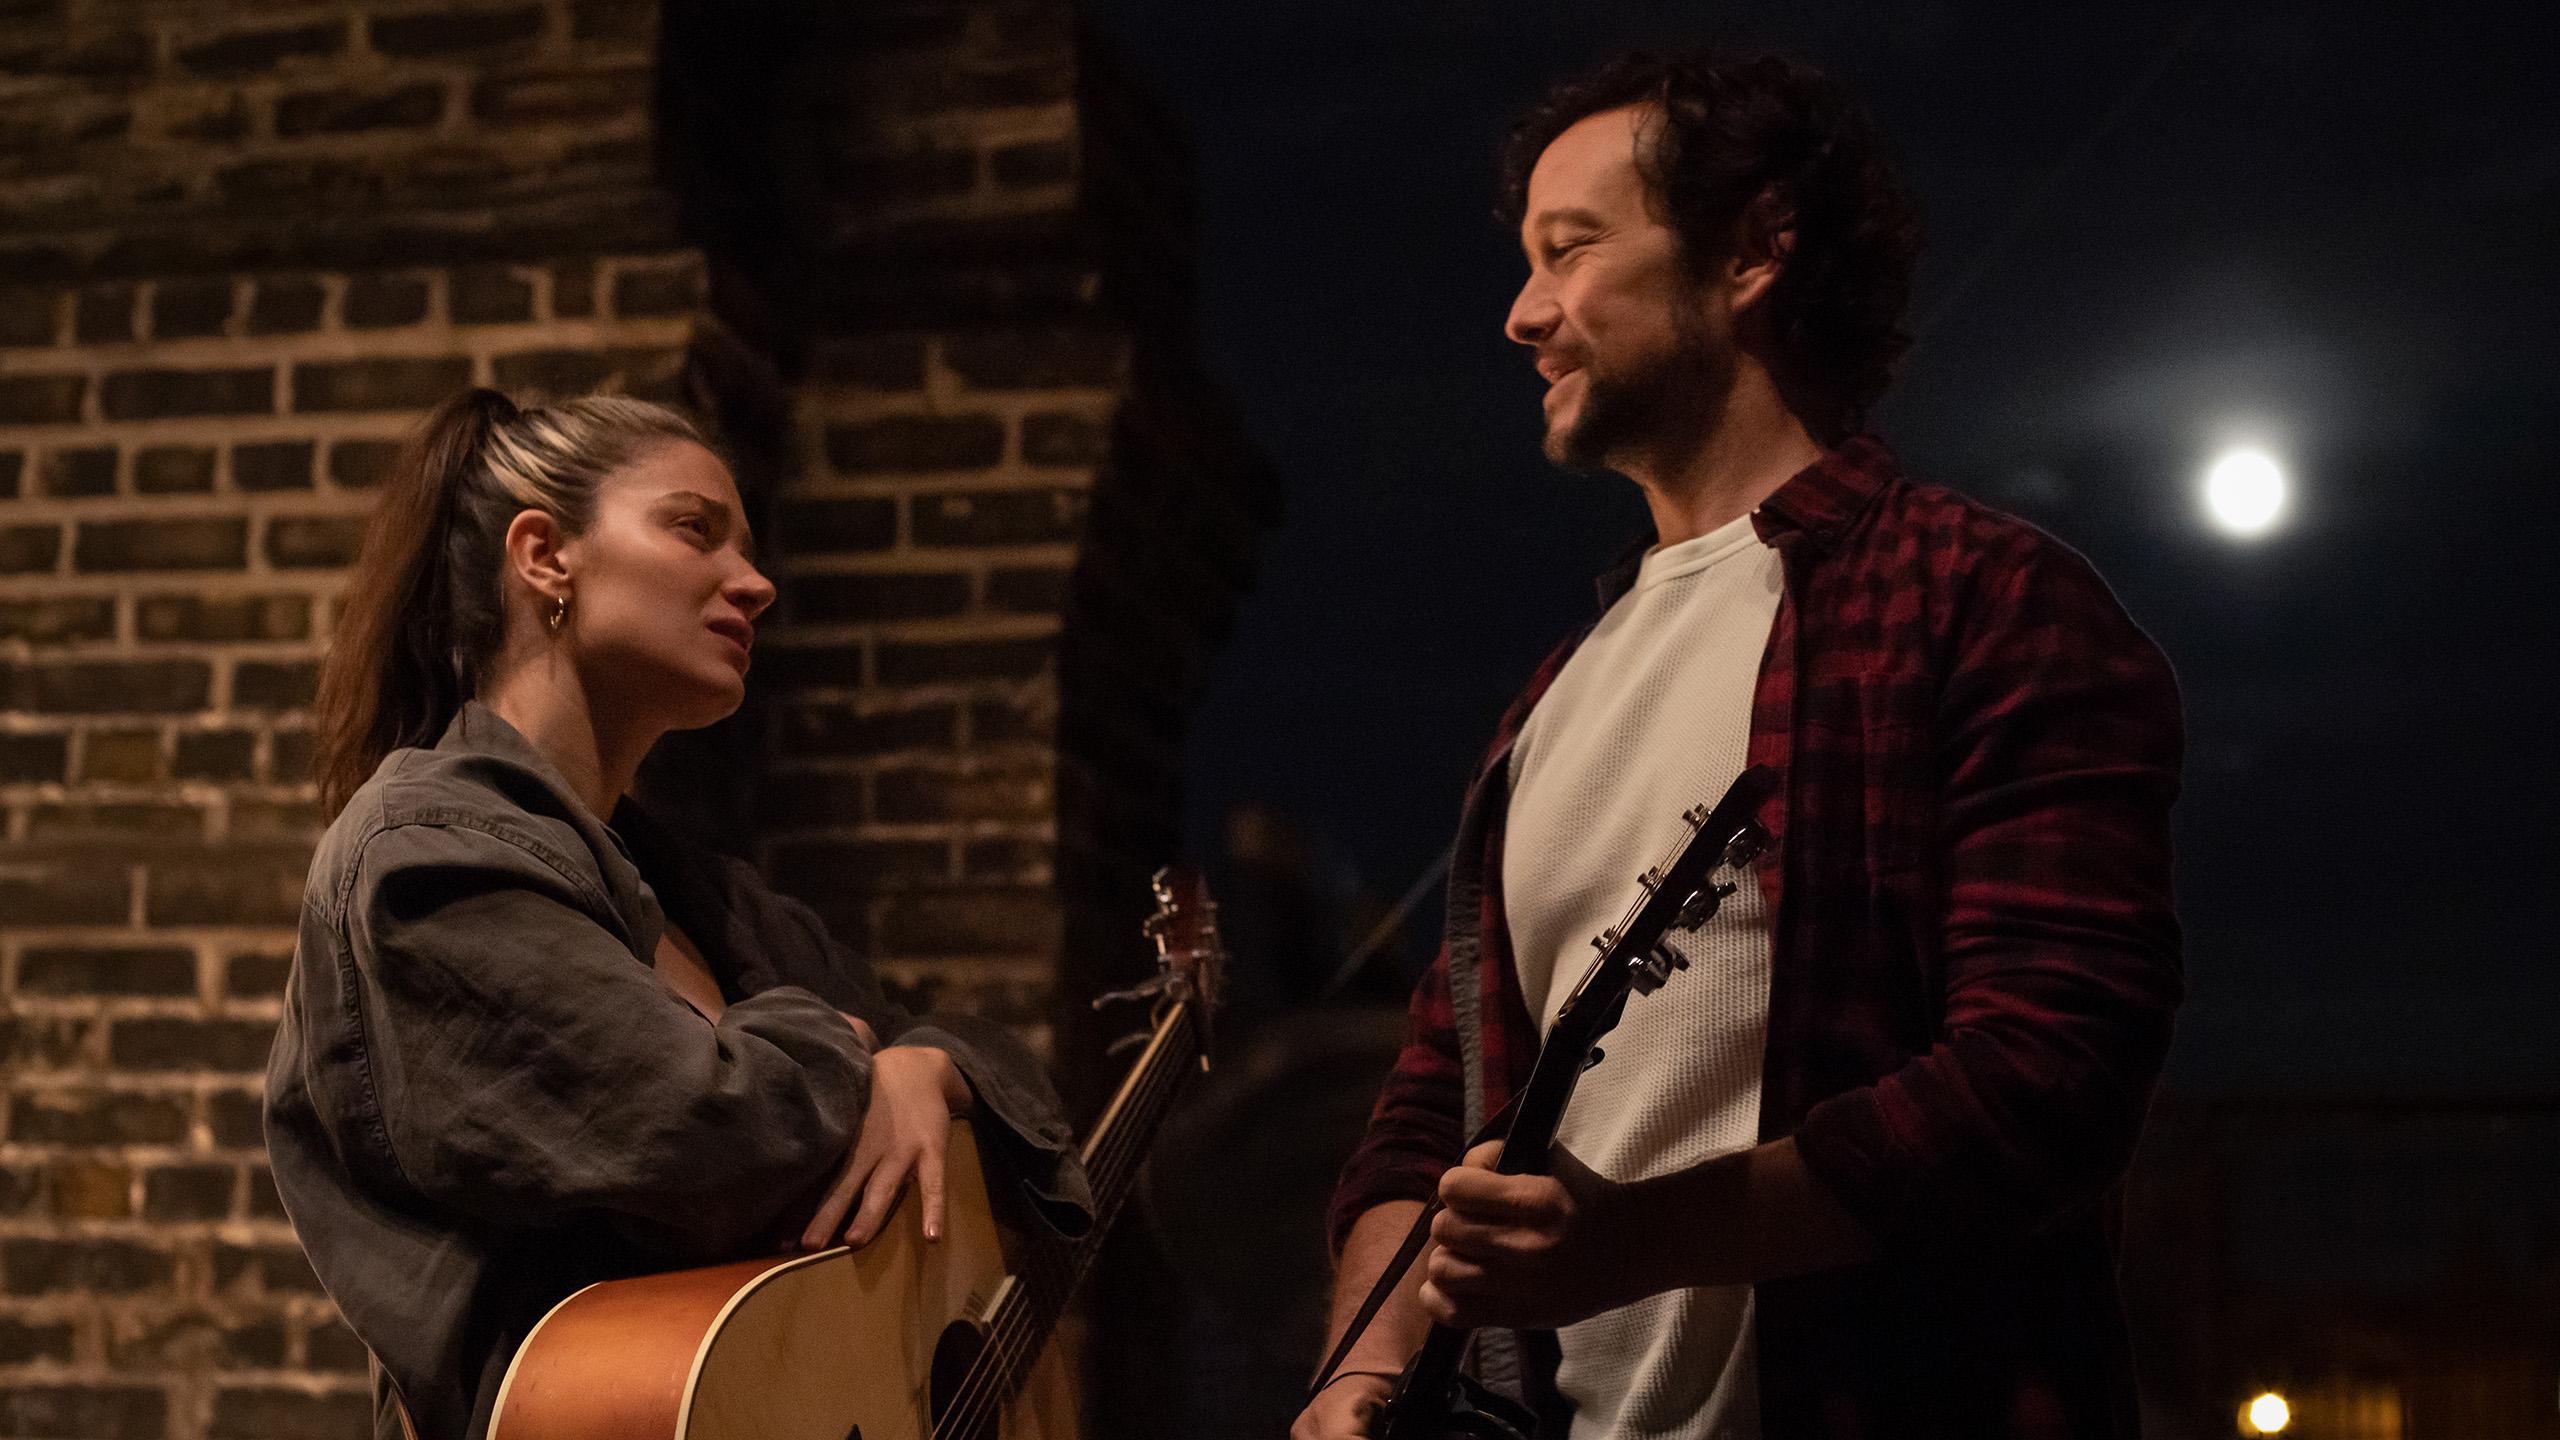 Their journey takes an intriguing turn when they cross paths with a former Los Angeles musician, played by Joseph Gordon-Levitt. Together, they embark on a musical adventure that reveals the transformative power of music. Prepare to be moved and inspired by 